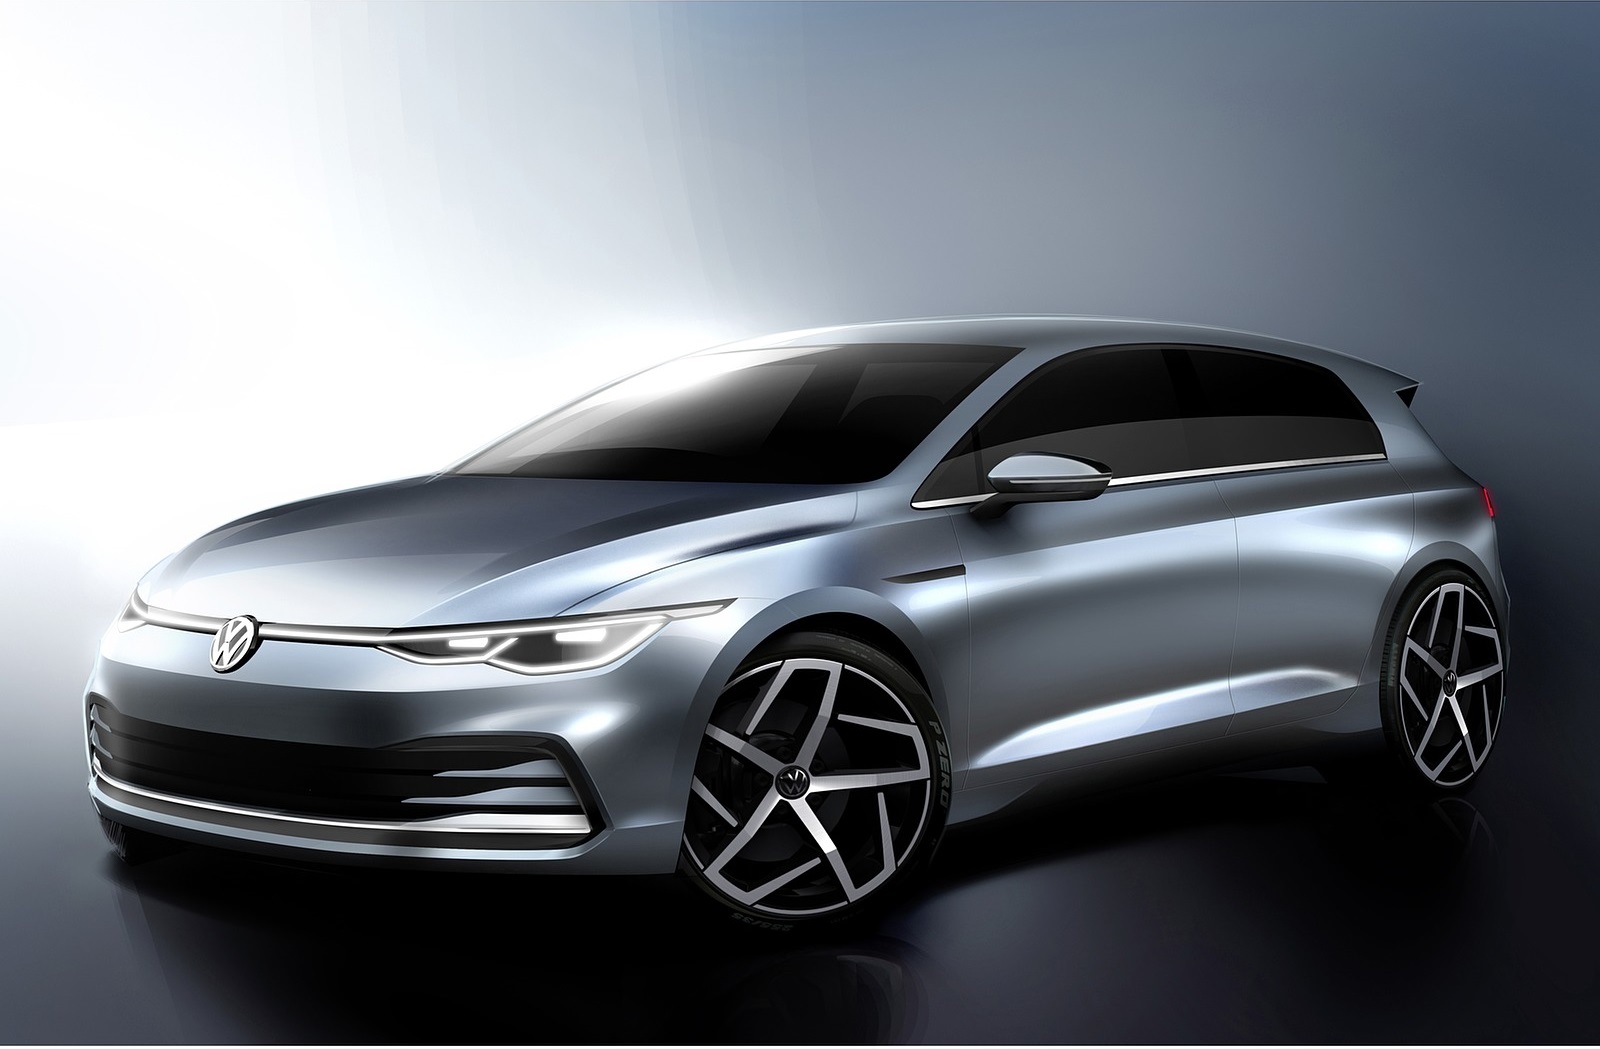 2020 Volkswagen Golf Mk8 and Previous Generations Design Sketch Wallpapers #73 of 81